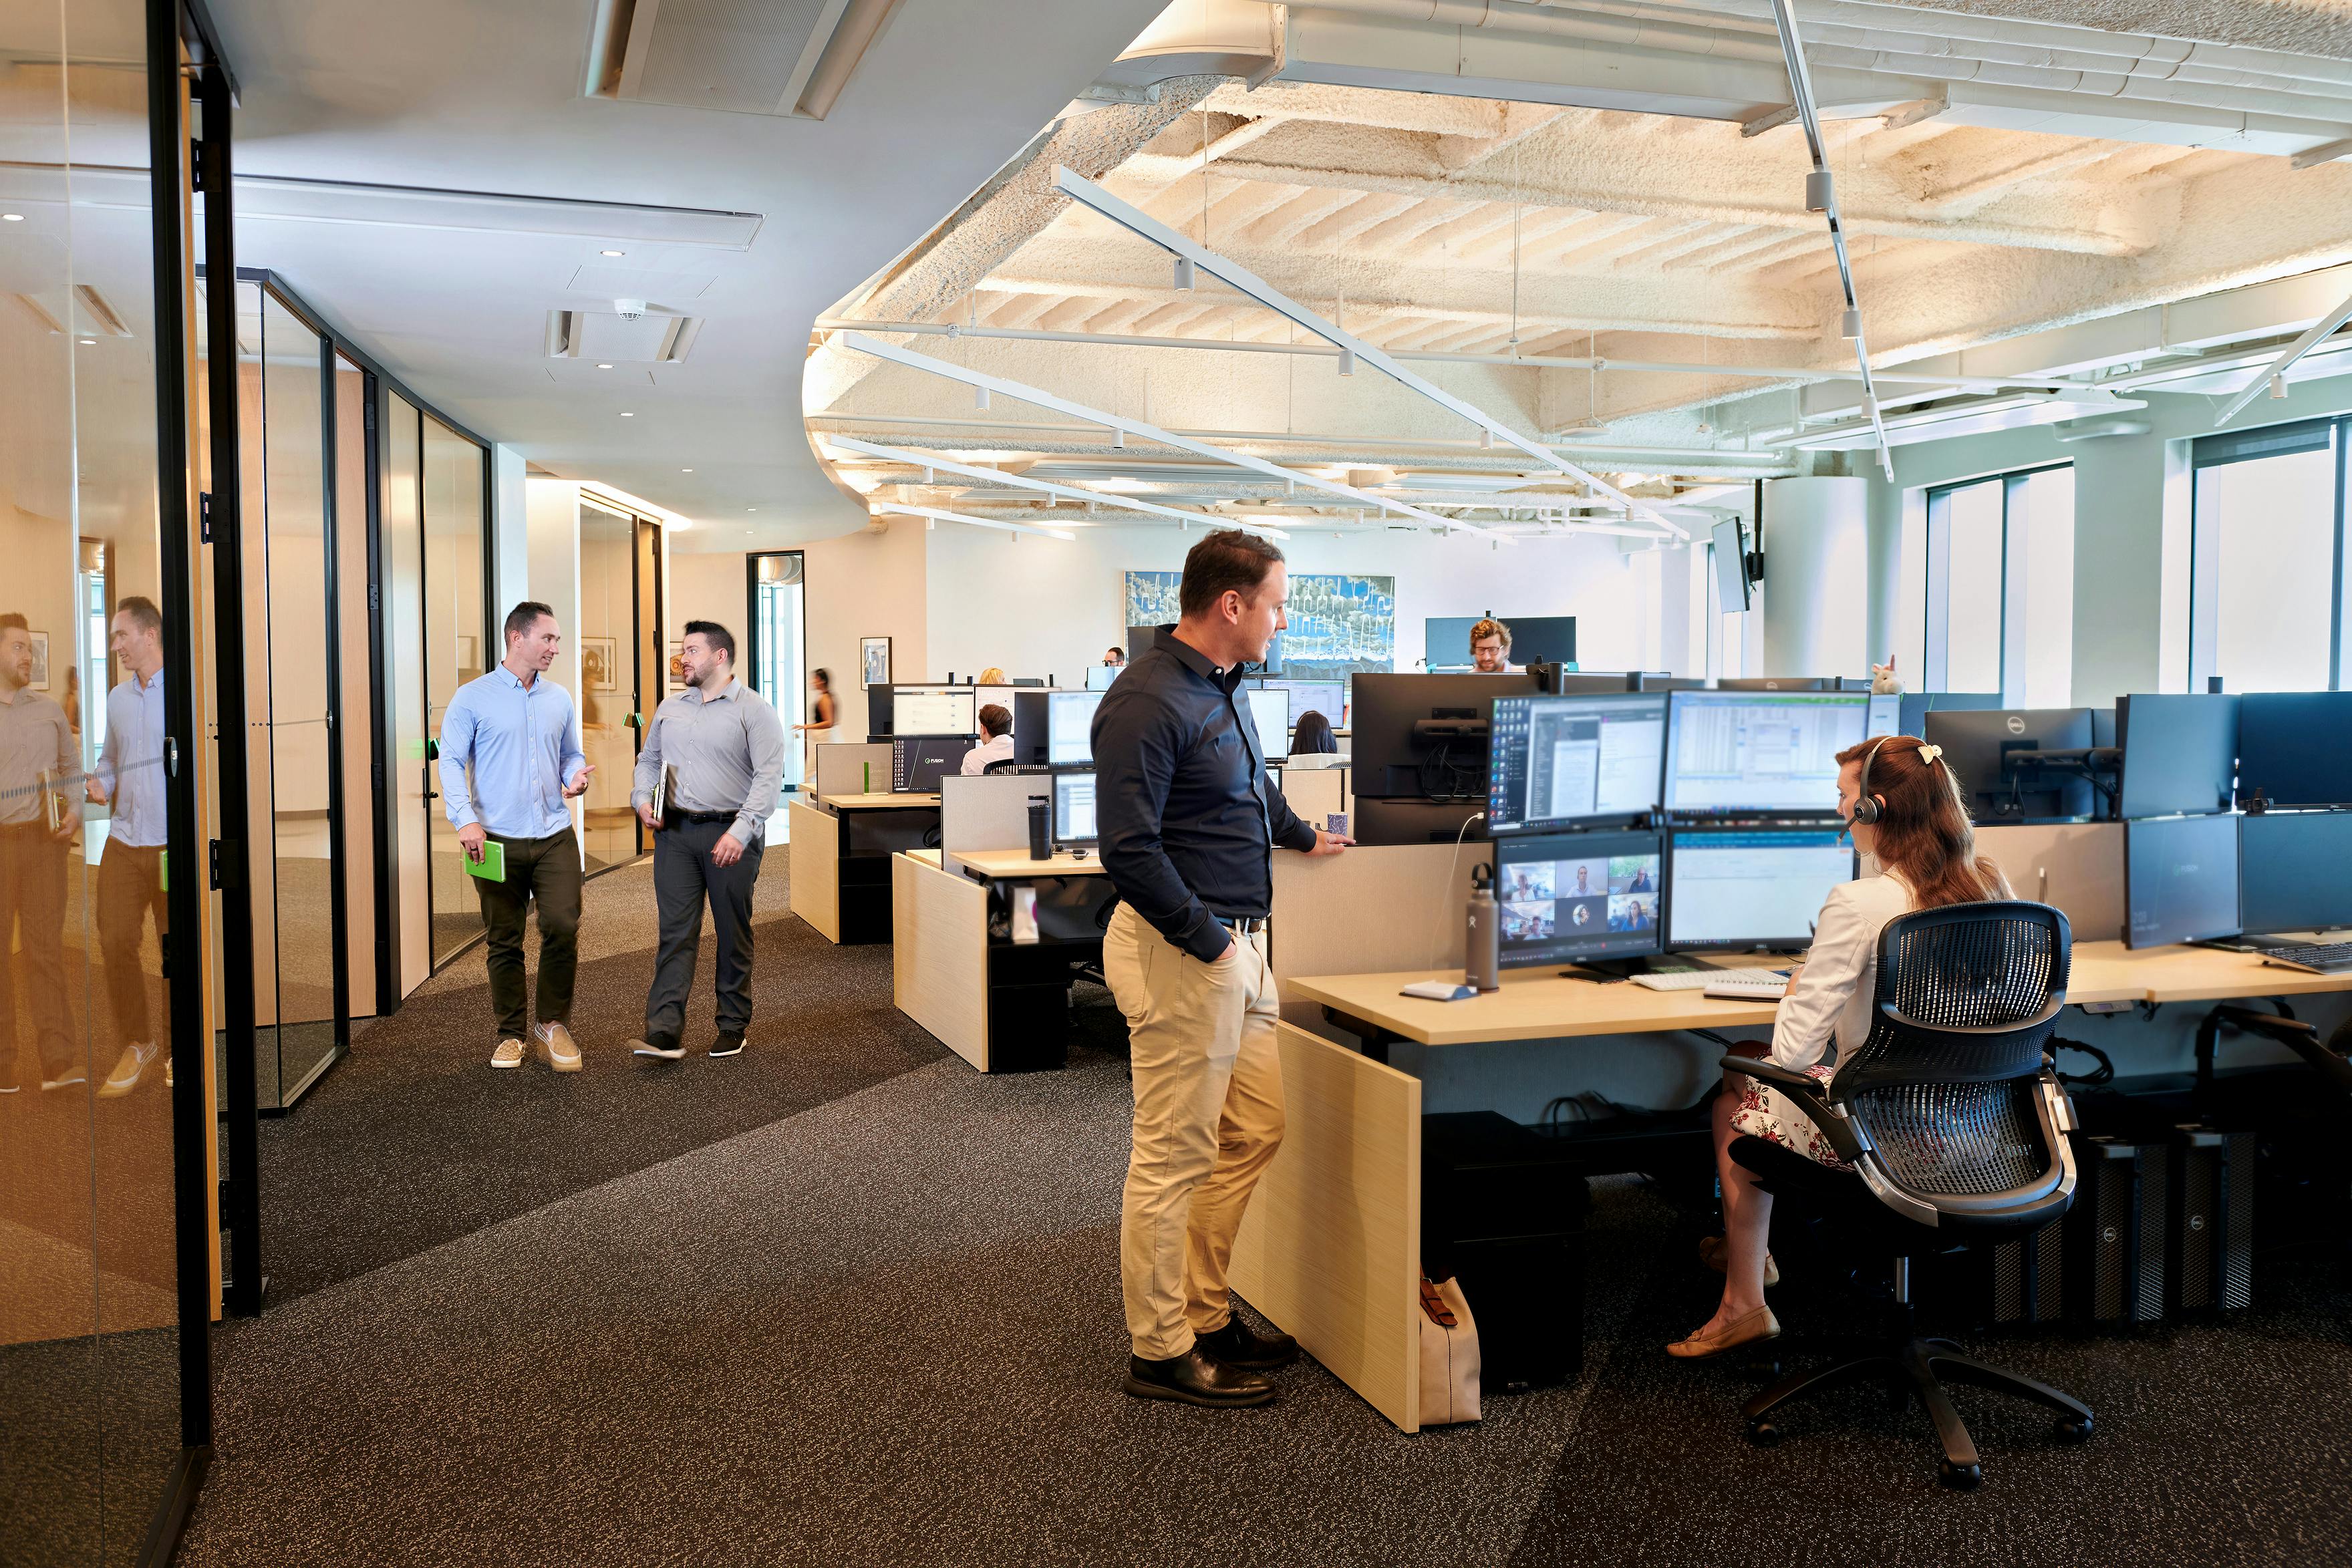 A modern office interior with employees chatting, walking, and working at desks